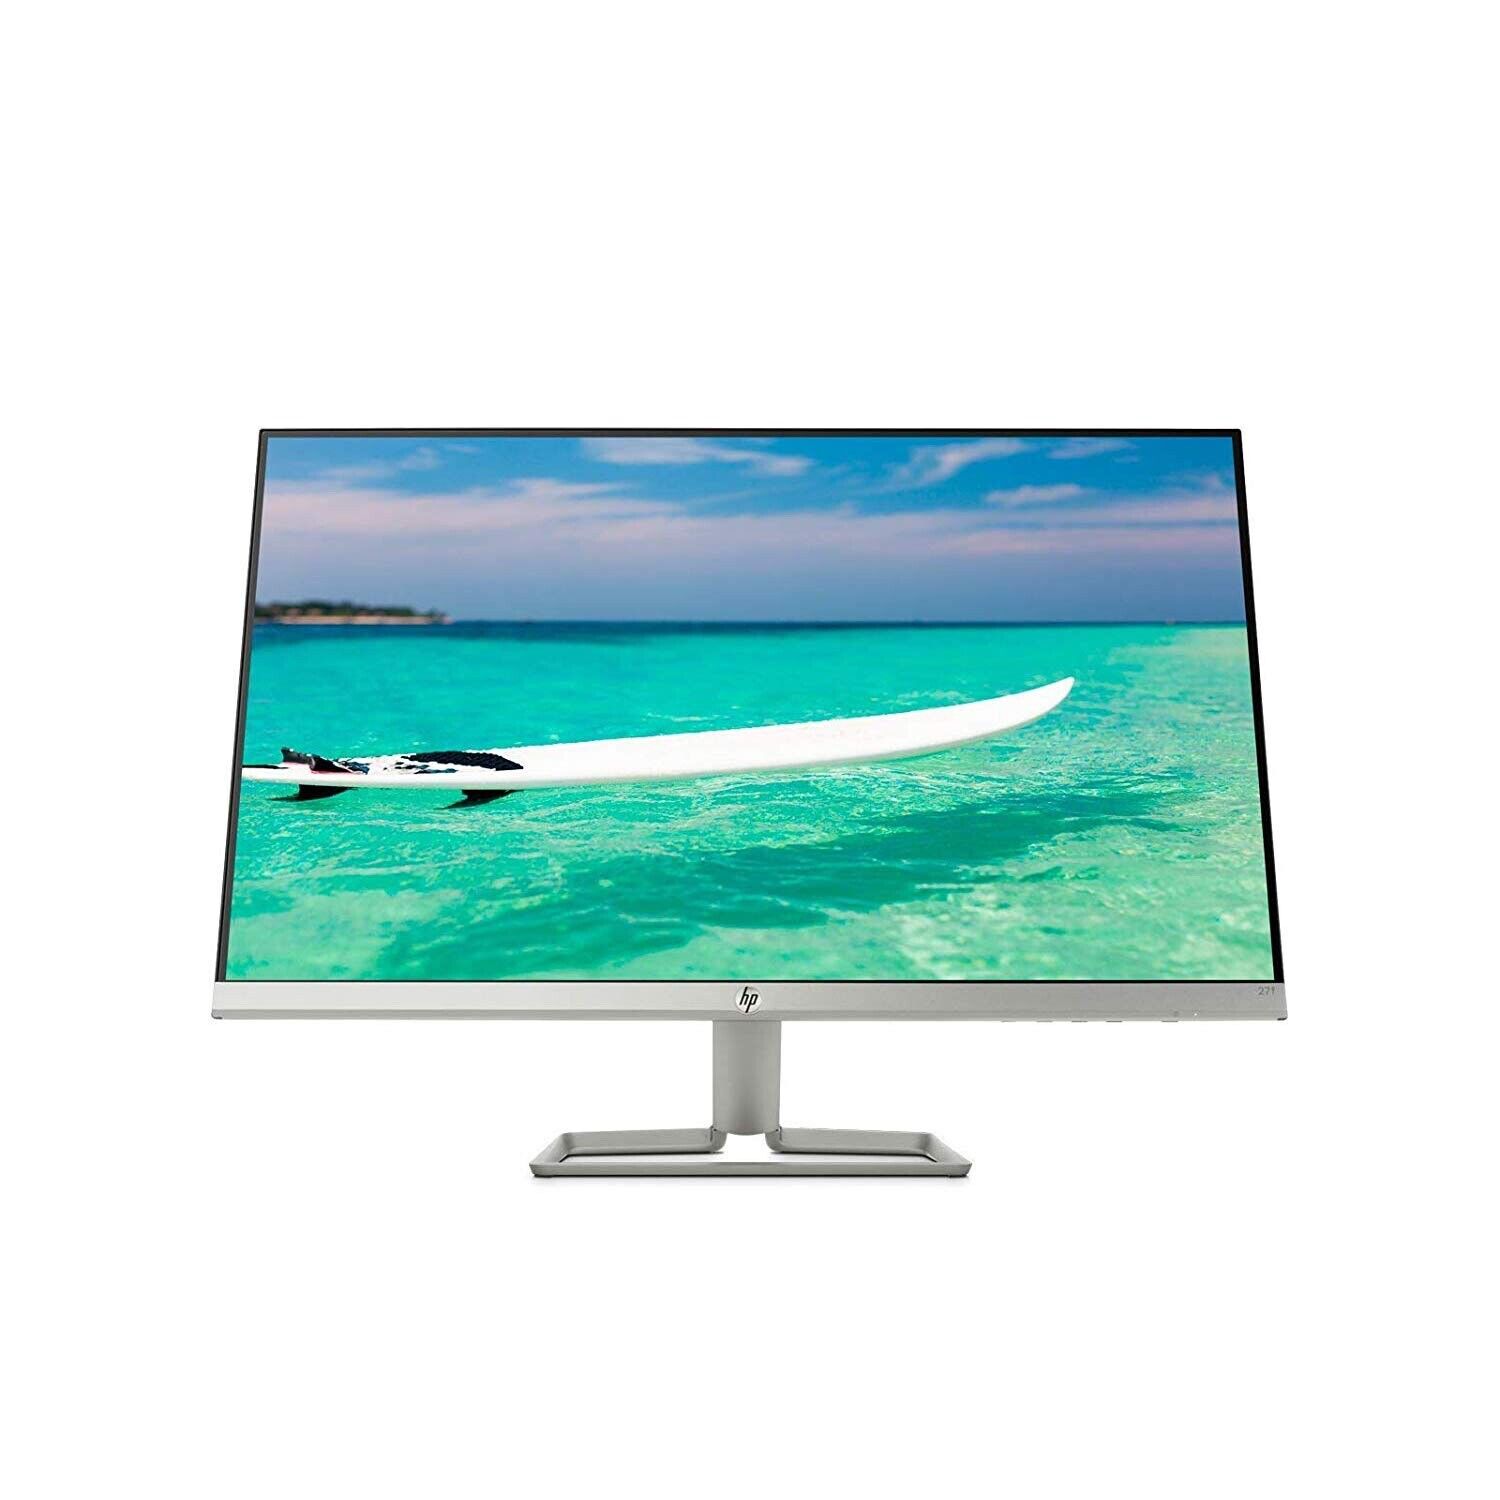 HP 27f 27 inch Monitor, full HD ultra-slim display with FREE Govee led lights